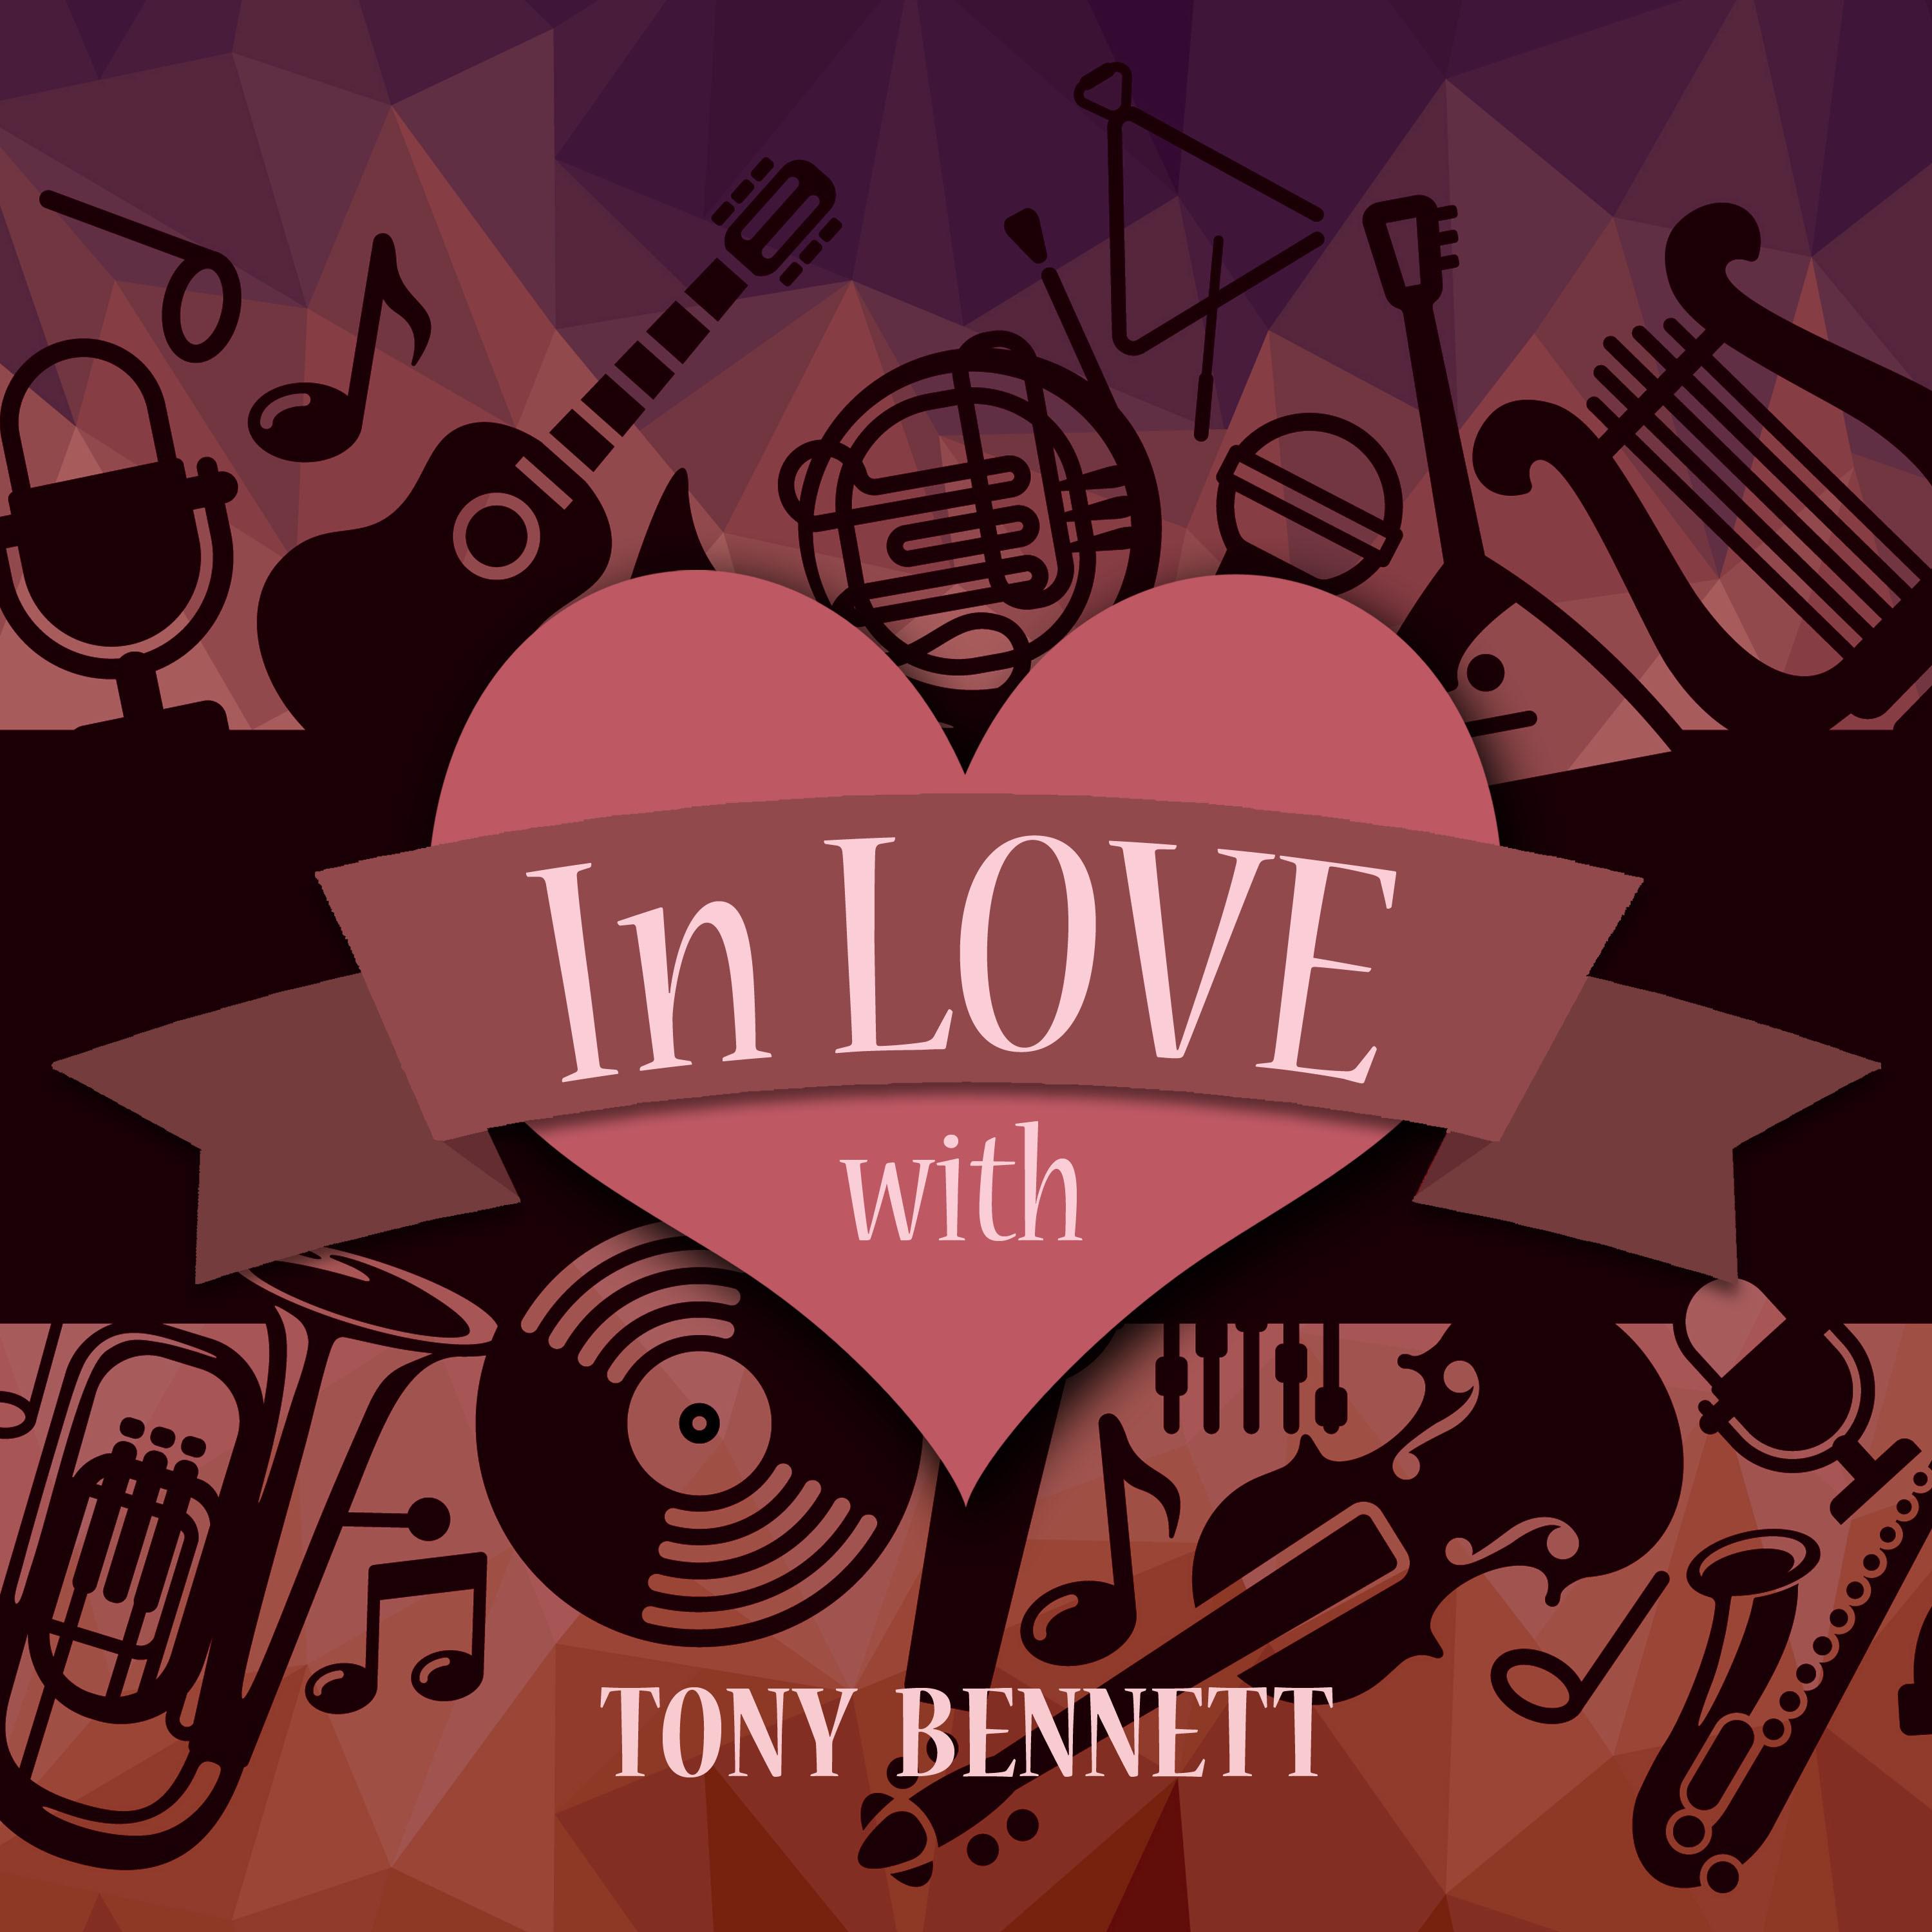 In Love with Tony Bennett